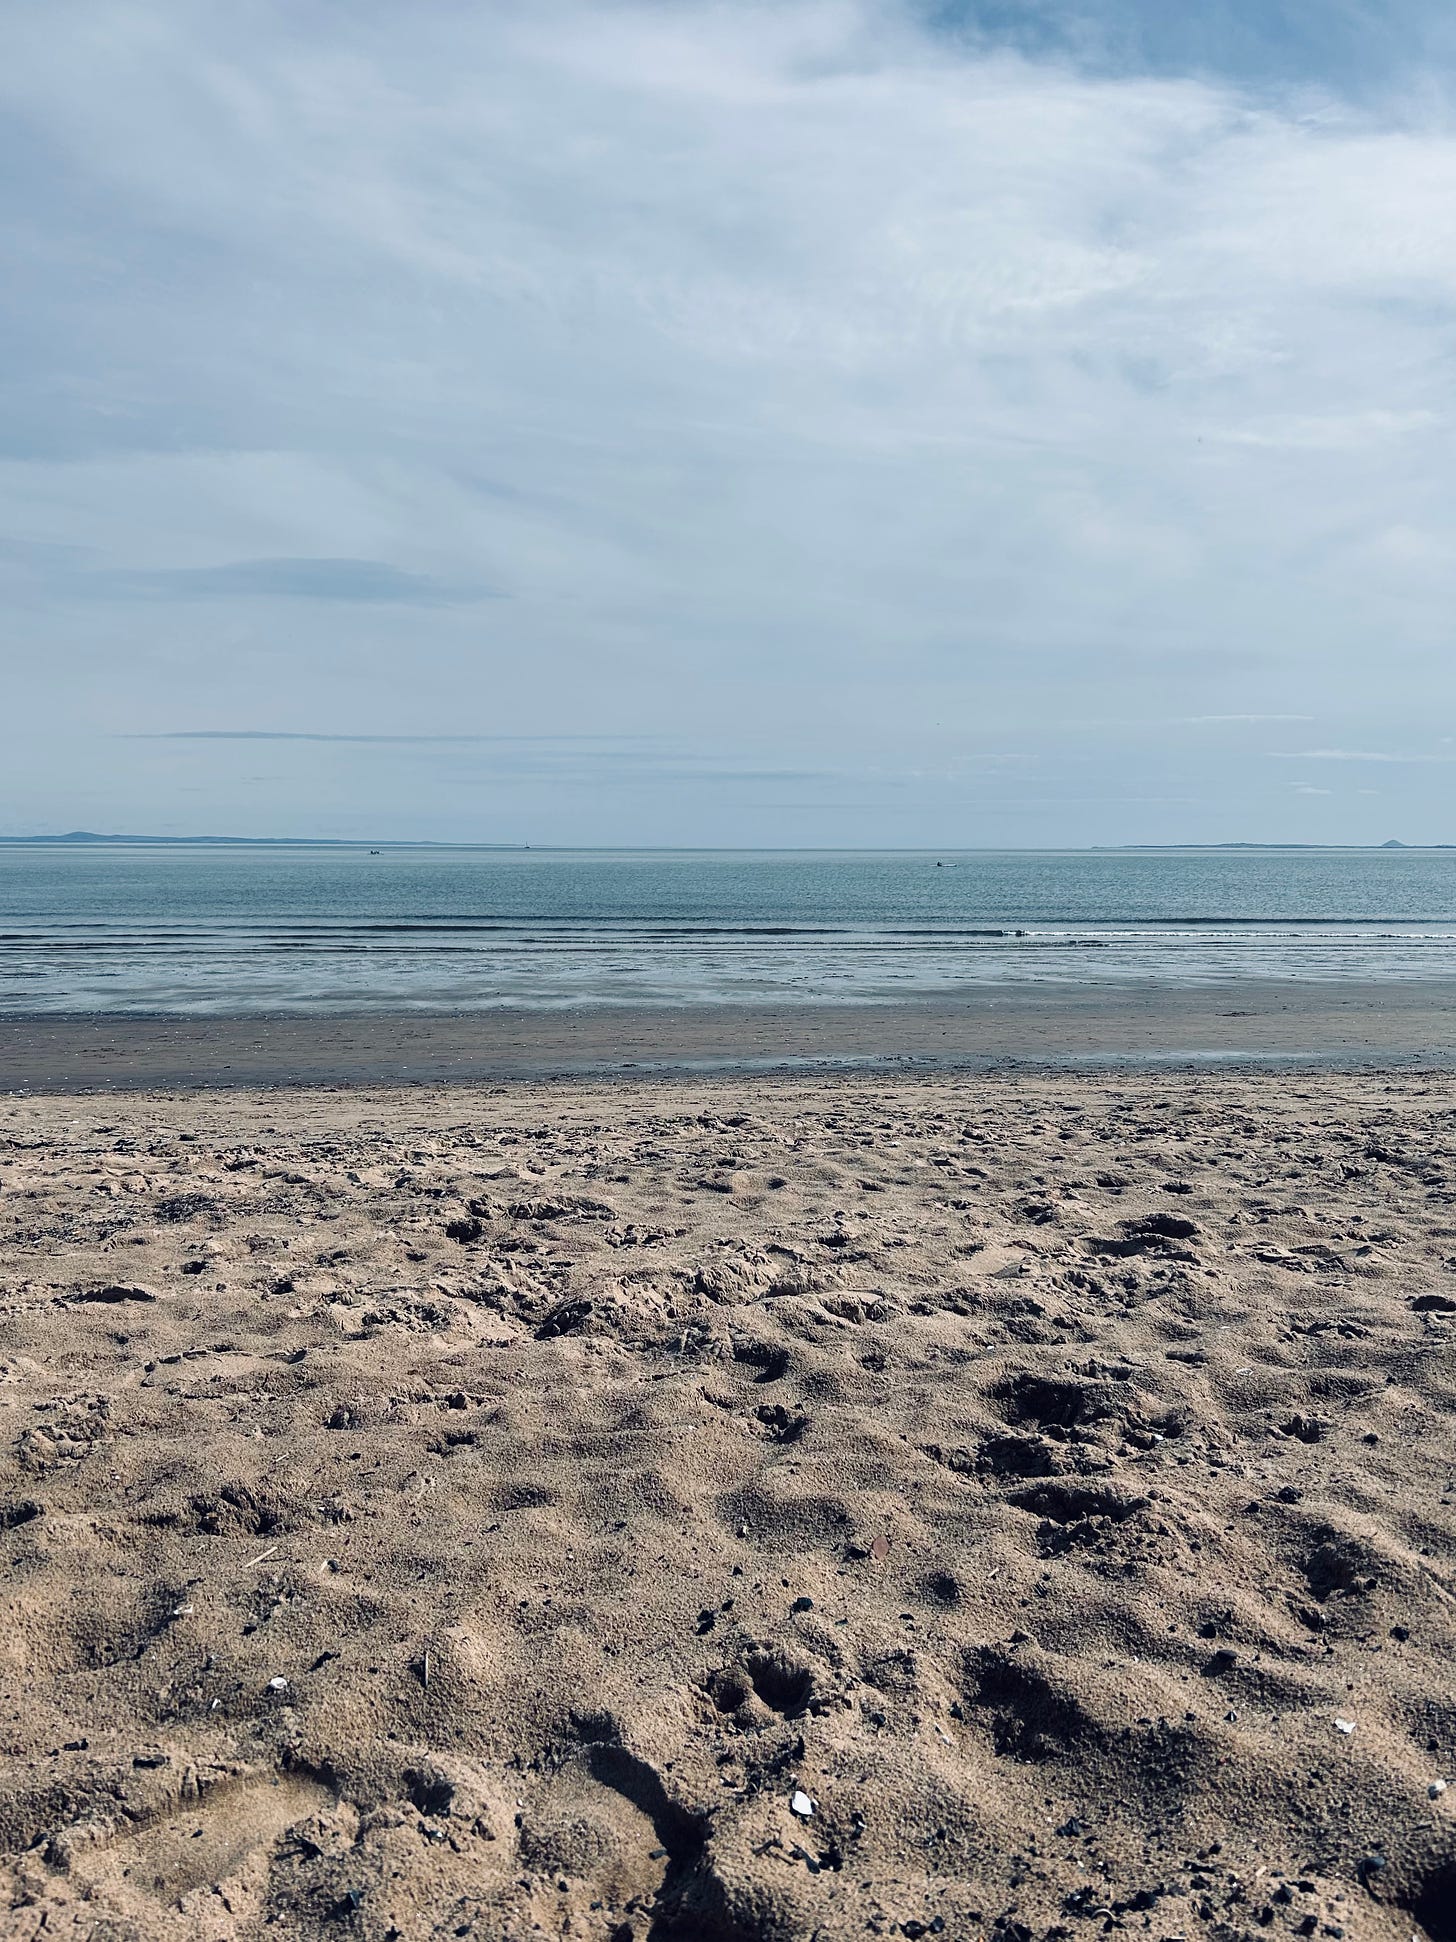 A photo of the Portobello Beach coast. In the foreground is a sandy shore. Then a layer of wet sand. At the horizon is blue sea water, topped off with blue, cloudy skies.